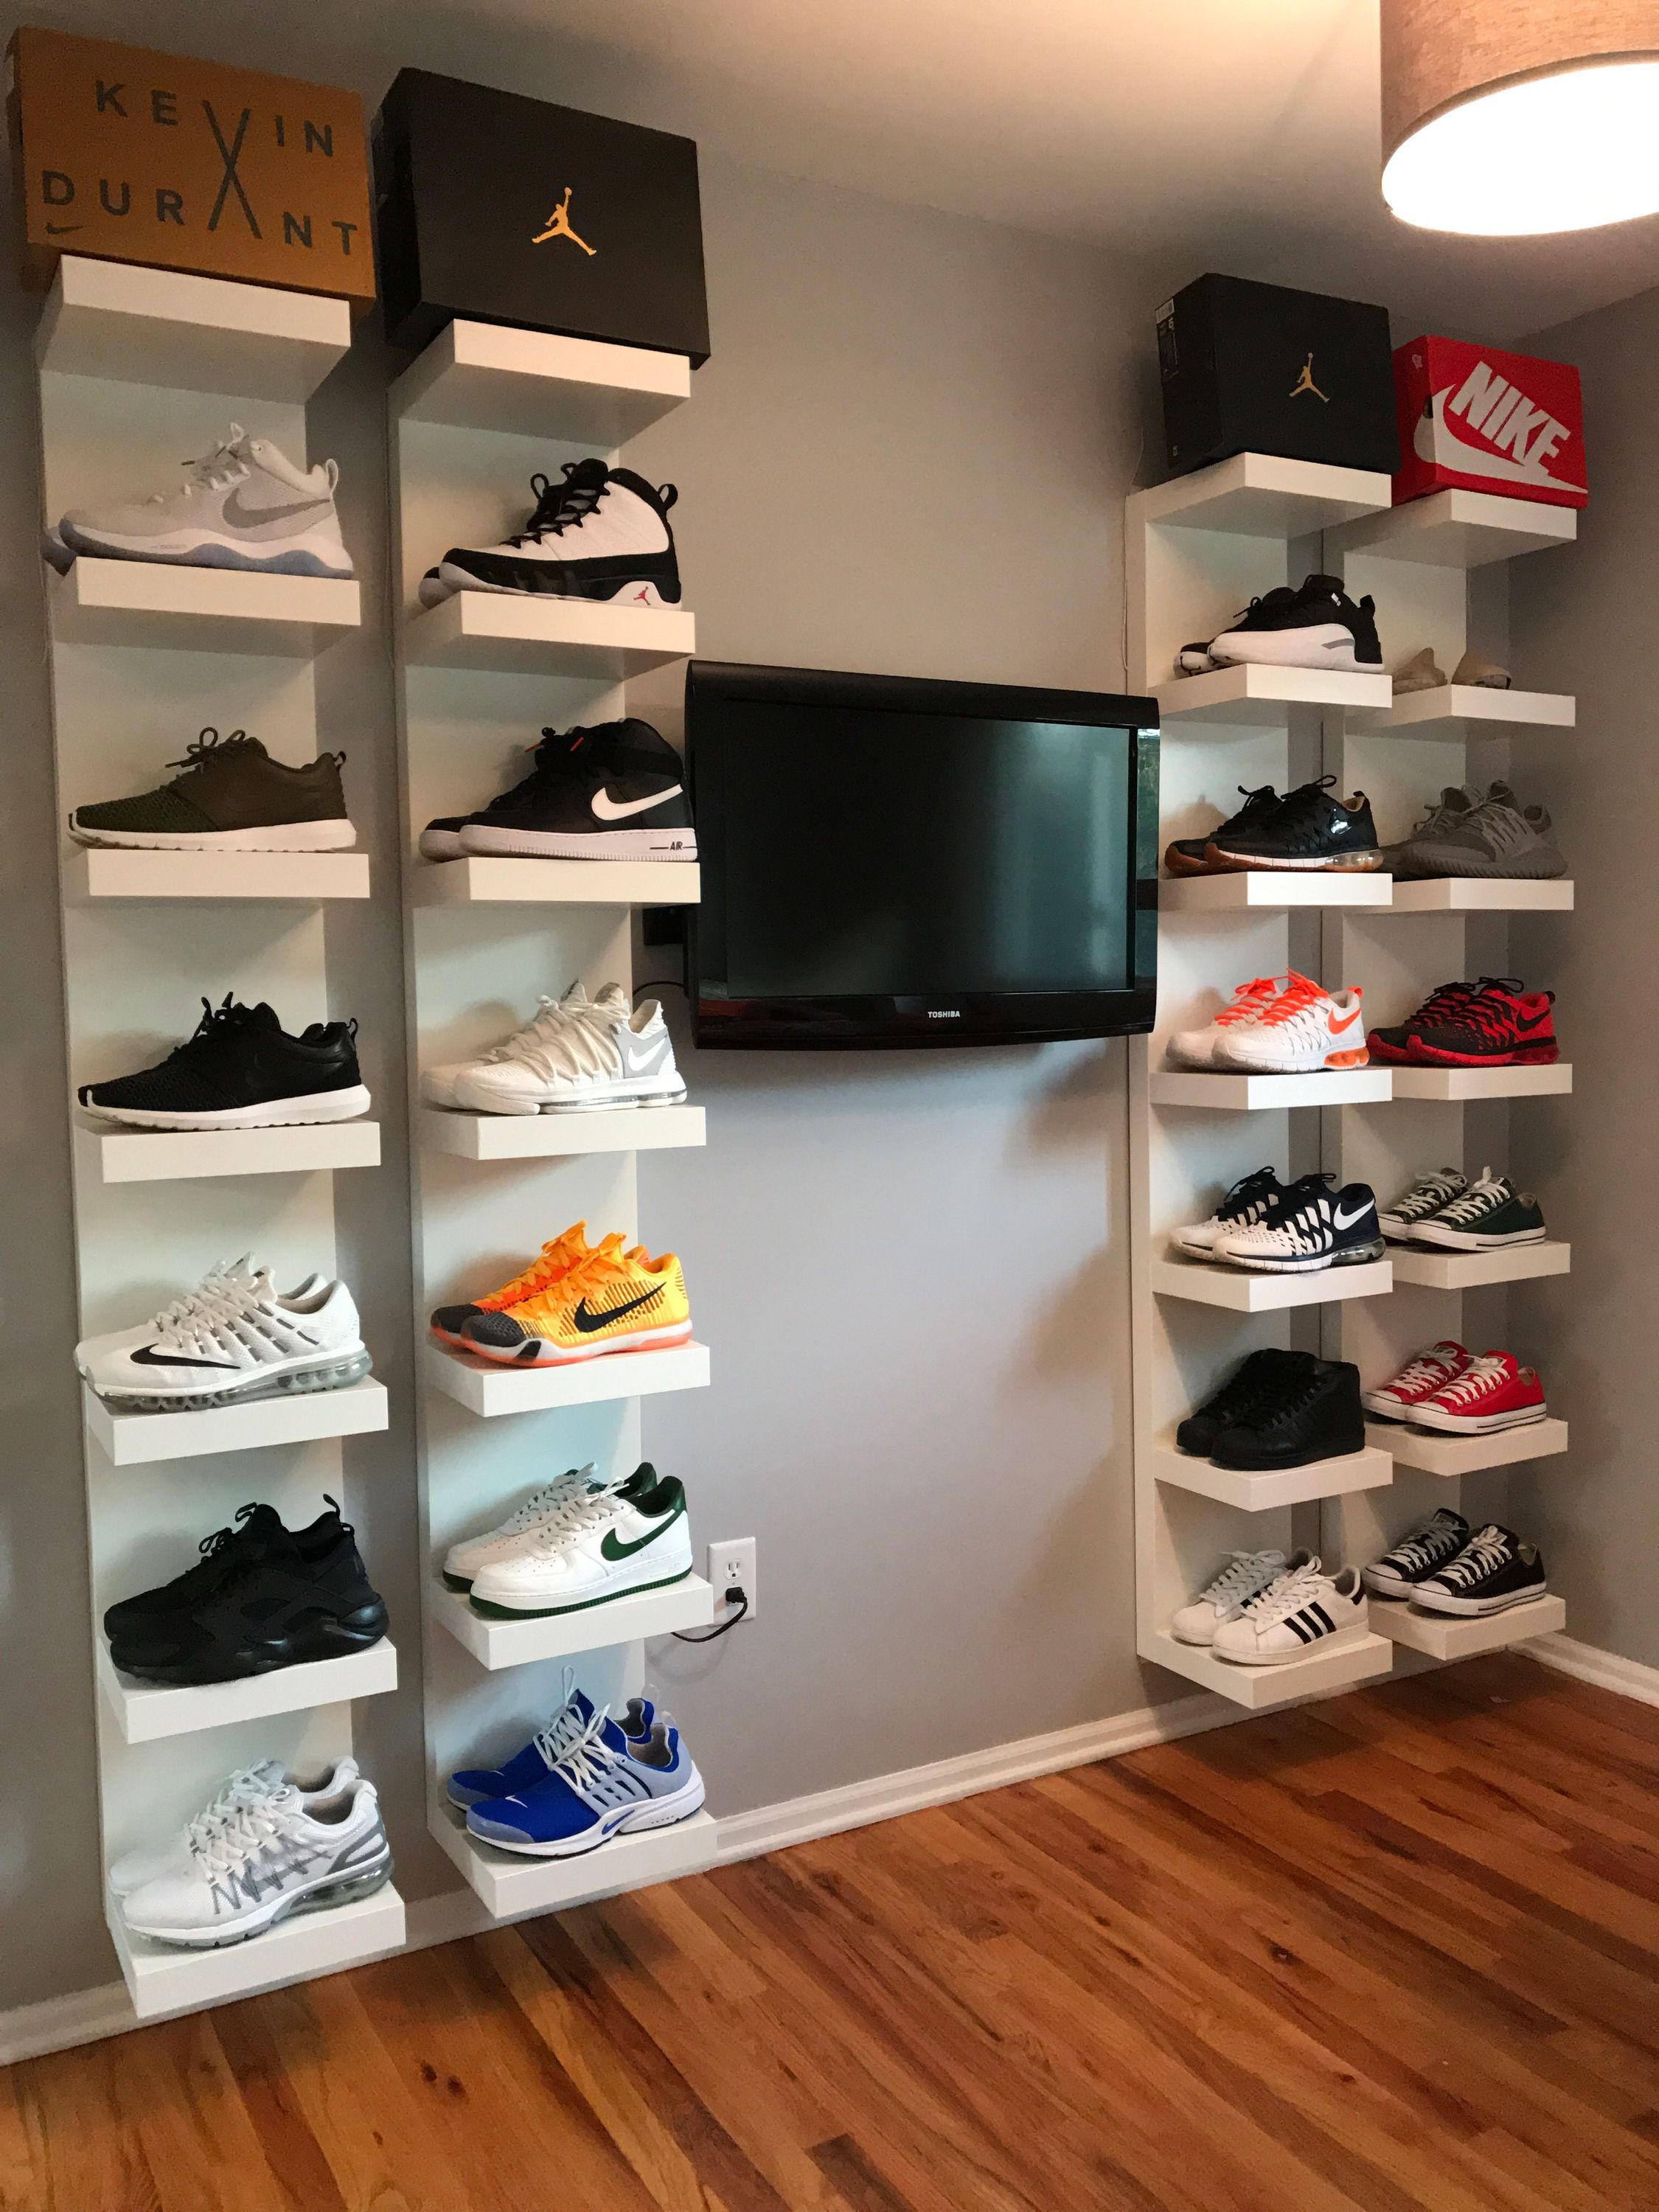 diy shoe display using ikea lack shelves projects white floating for shoes espresso wall mounted coat rack simple wood bookshelf traditional fireplace mantels command curtain